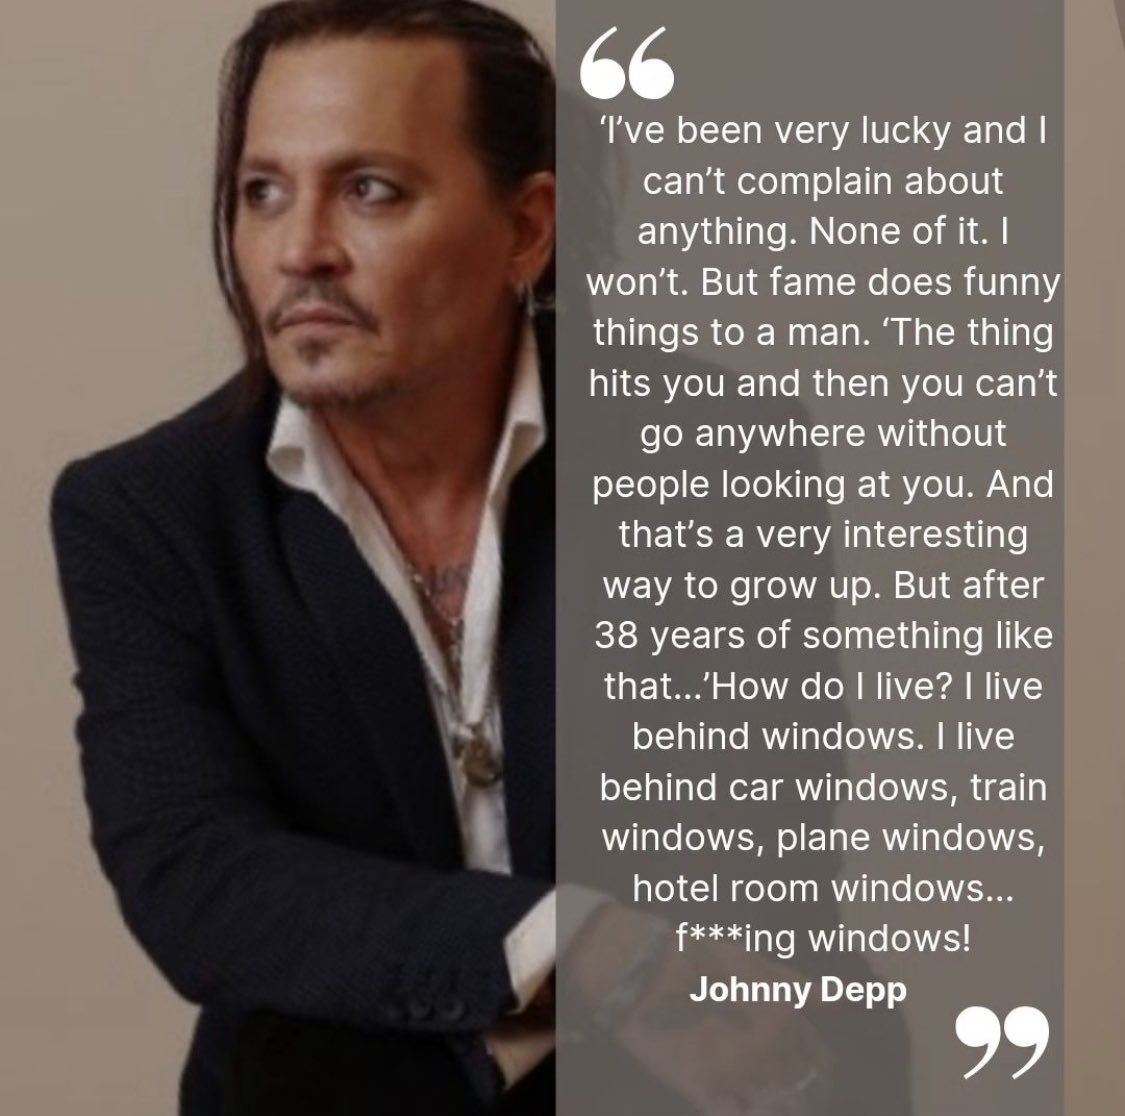 I've been very lucky and I can't complain about anything. None of it. I won't. But fame does funny things to a man. 'The thing hits you and then you can't go anywhere without people looking at you. And that's a very interesting way to grow up. But after 38 years….Johnny Depp